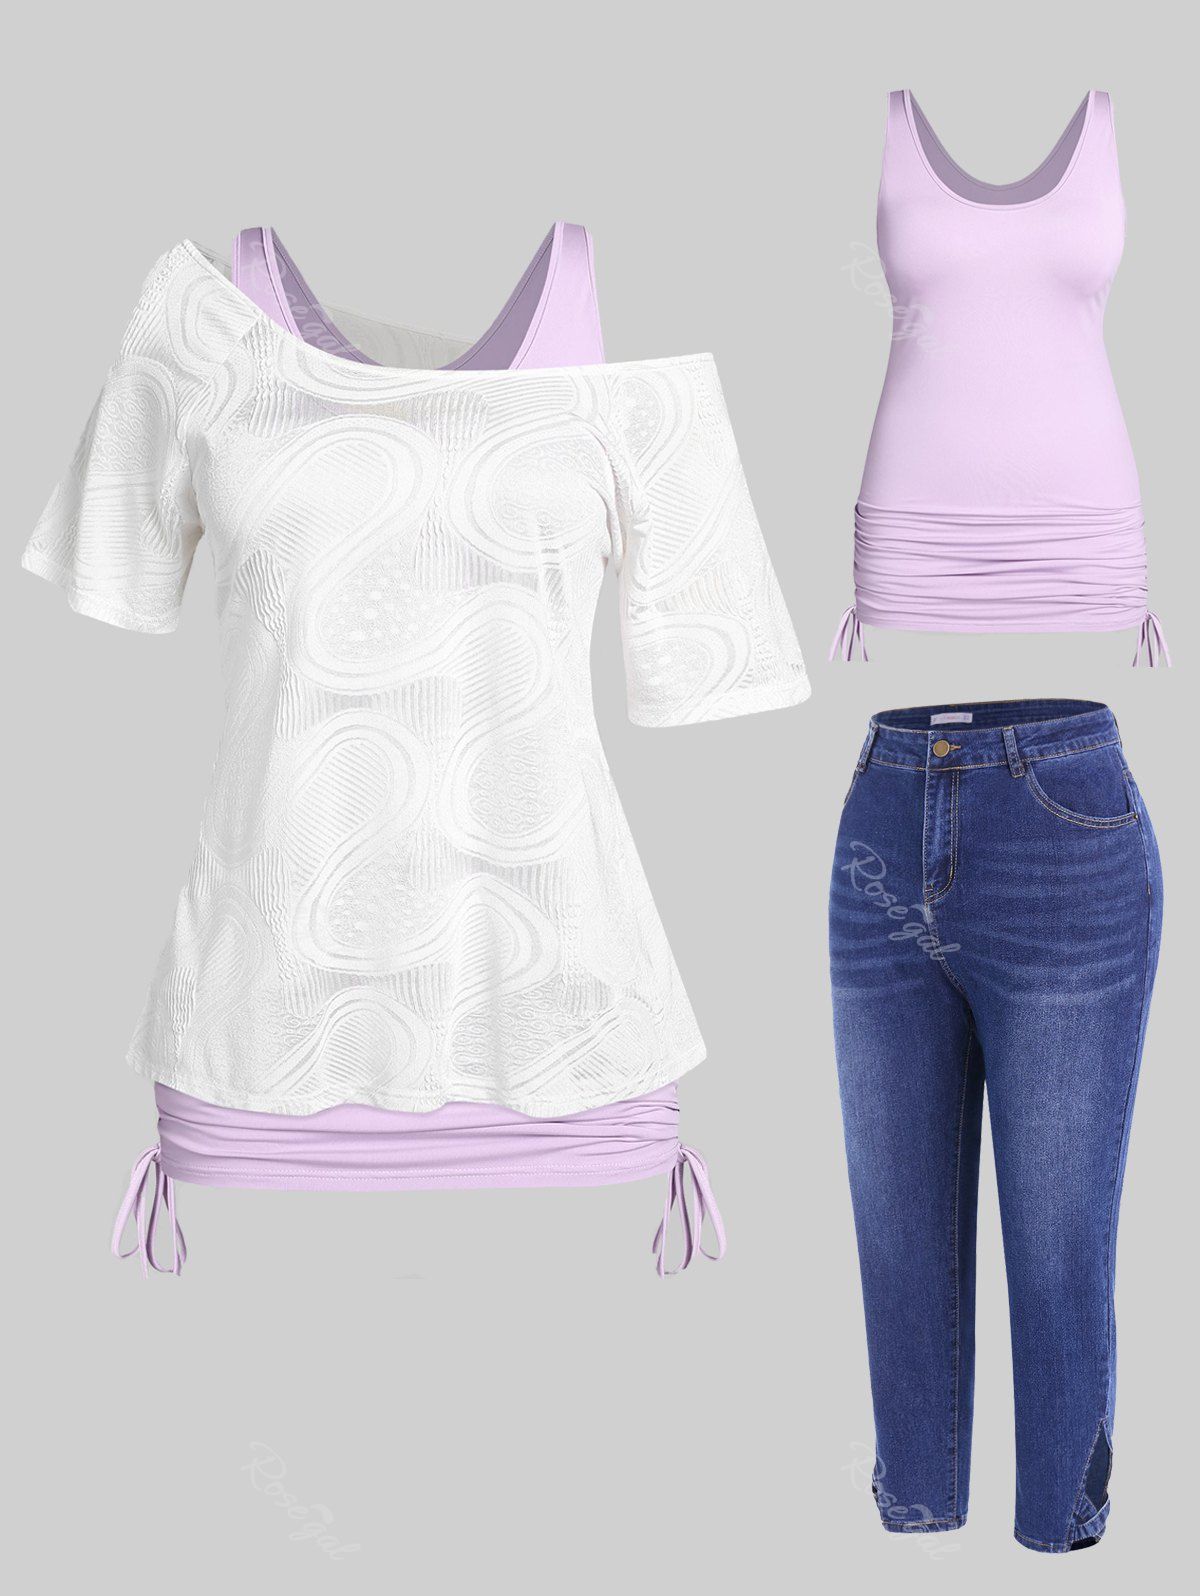 Hot Skew Collar Textured Cinched  T-shirt Set and Faded Ninth Jeans Plus Size Summer Outfit  